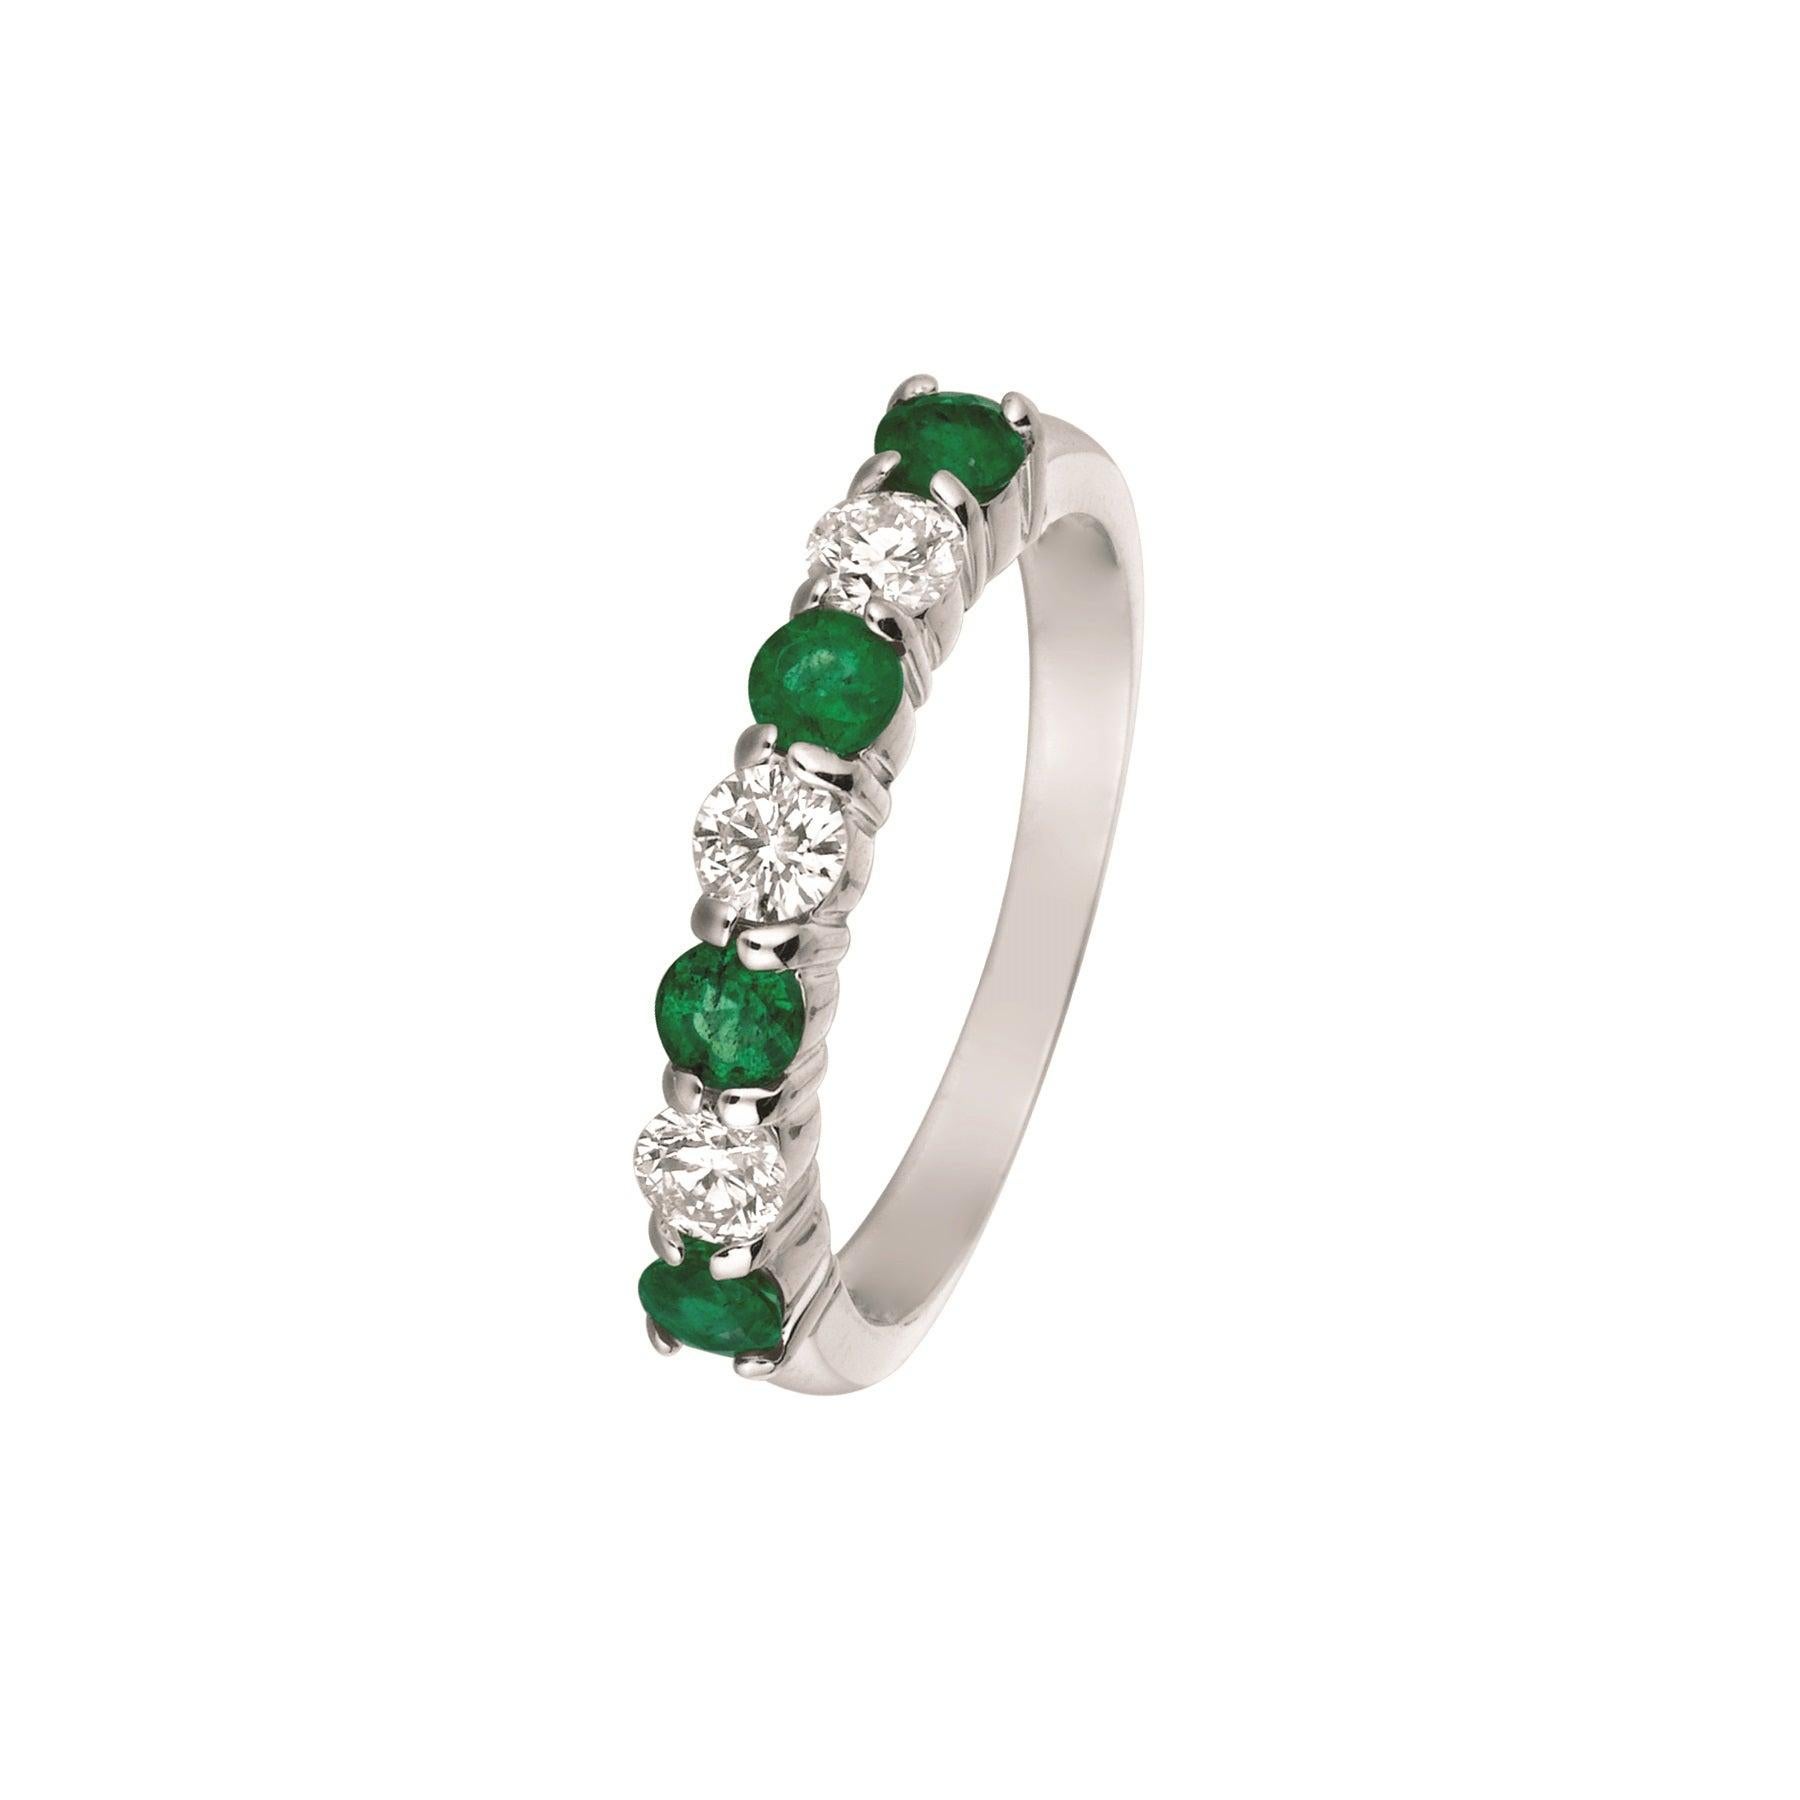 For Sale:  1.45 Carat Natural Diamond and Emerald 7-Stone Ring Band 14 Karat White Gold 2